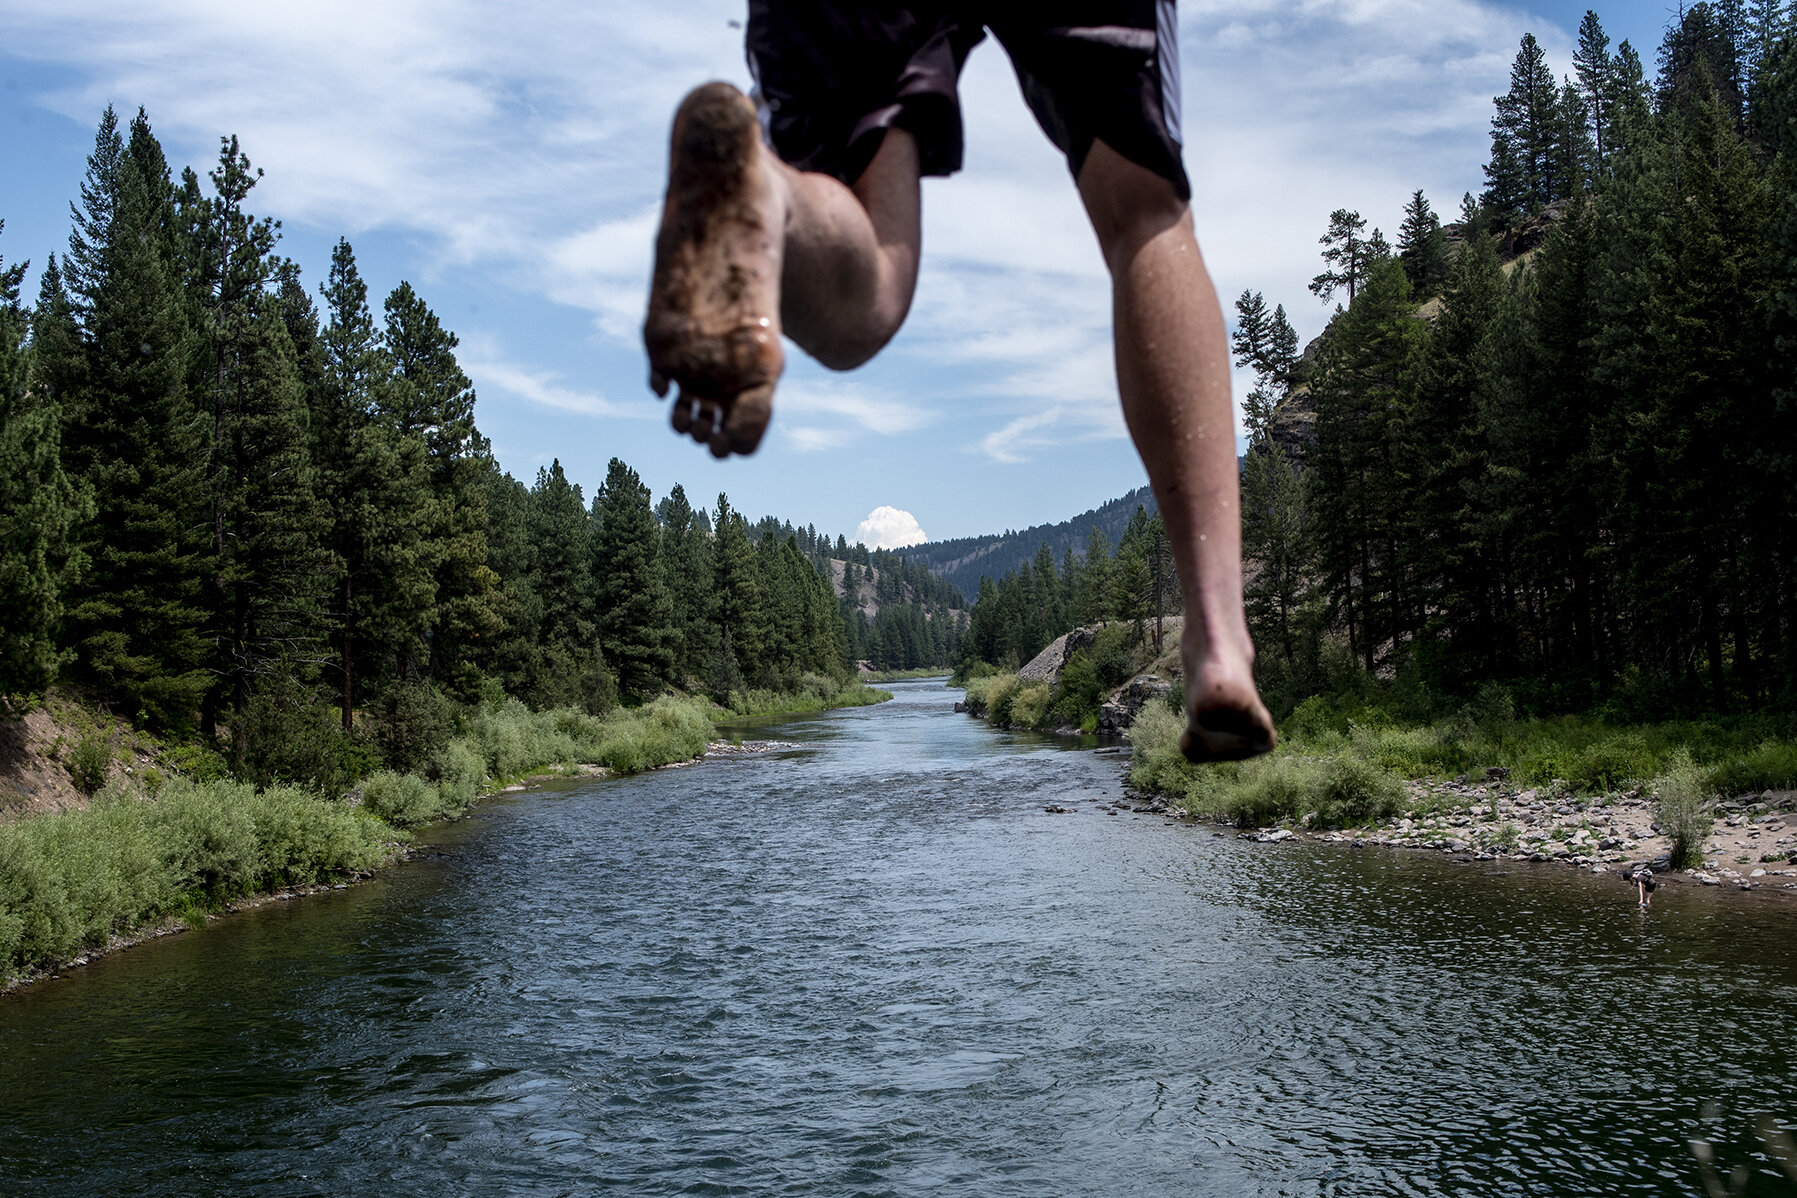  Gabriel Schwartz jumps off a cliff into the Blackfoot River at the Johnsrud Park Fishing Access Site, Tuesday, July 23, 2019. With temperatures soaring into the mid-90s, the Blackfoot Corridor offers reprieve from the hot Summer Sun with various rec